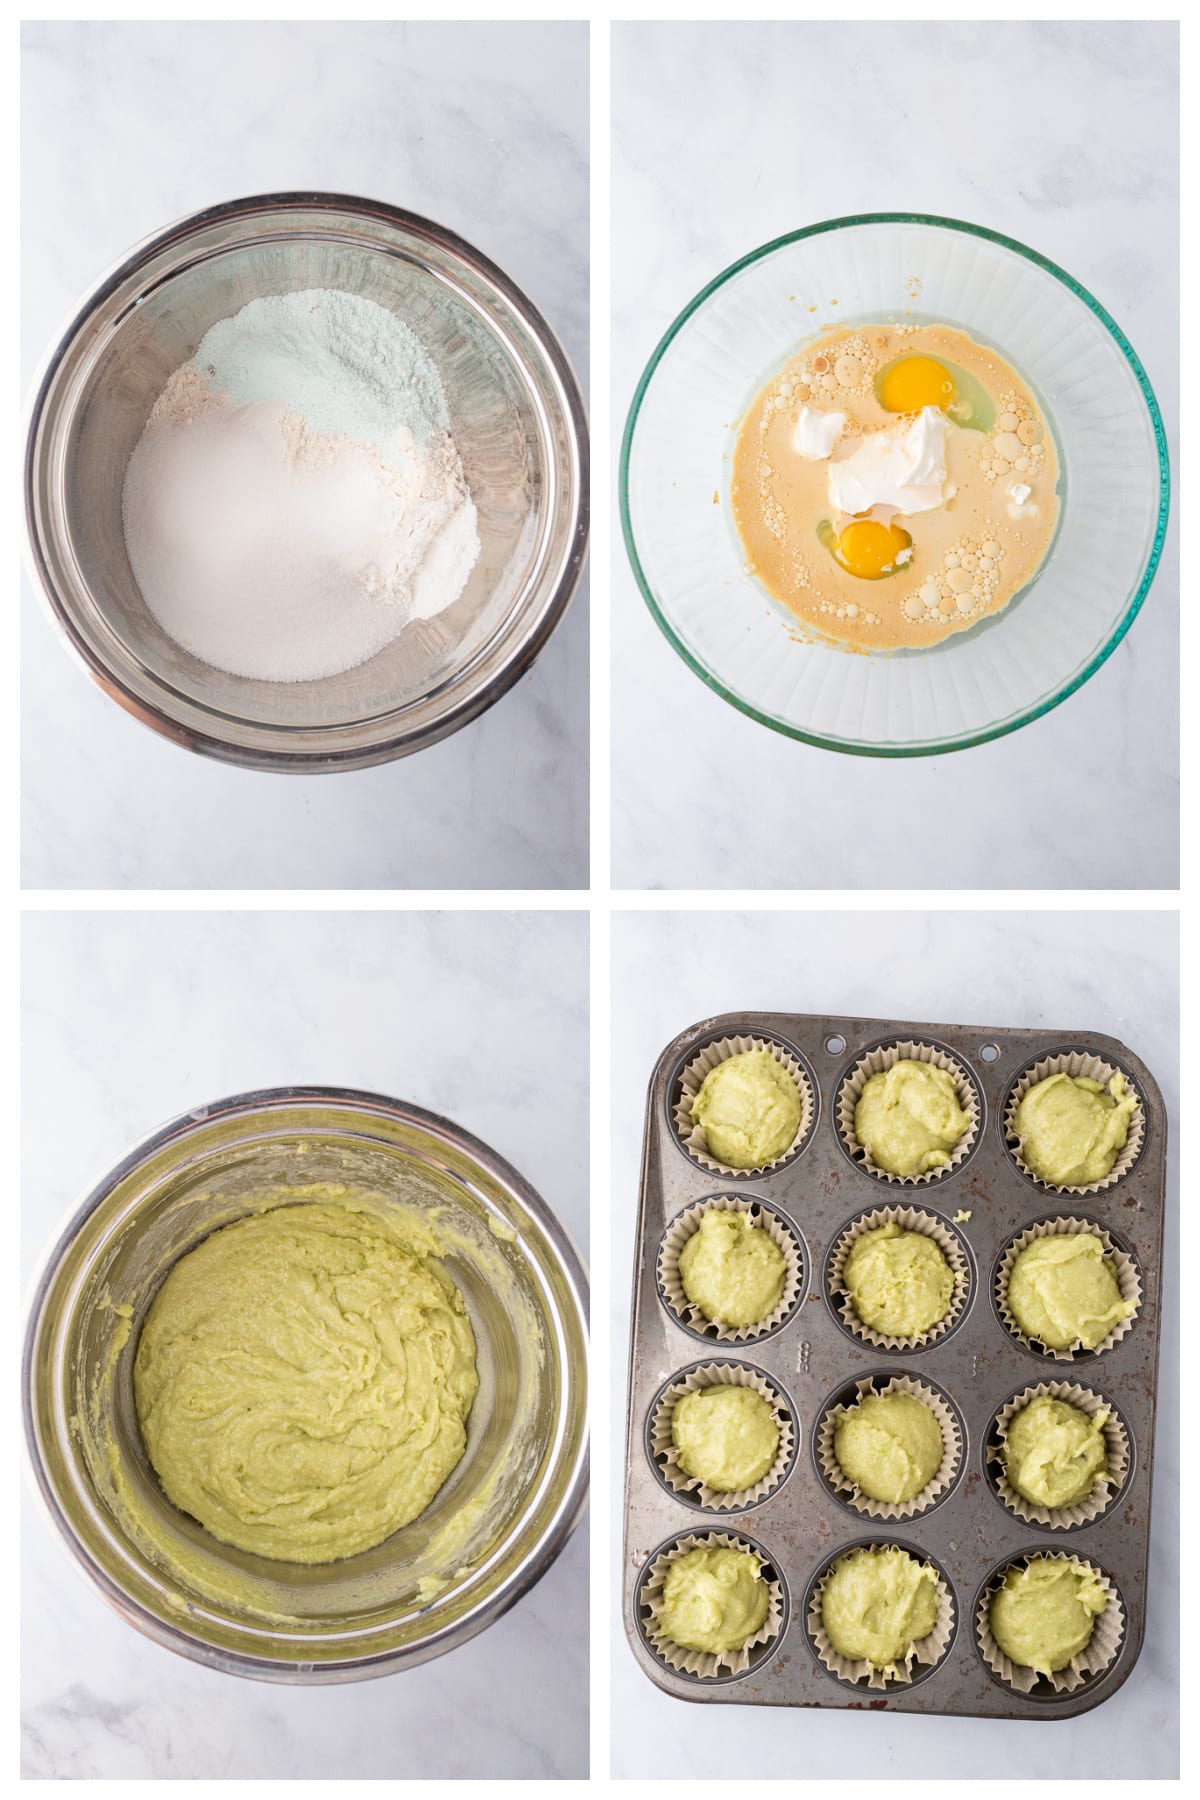 A collage of four images showing how to make pistachio muffins.